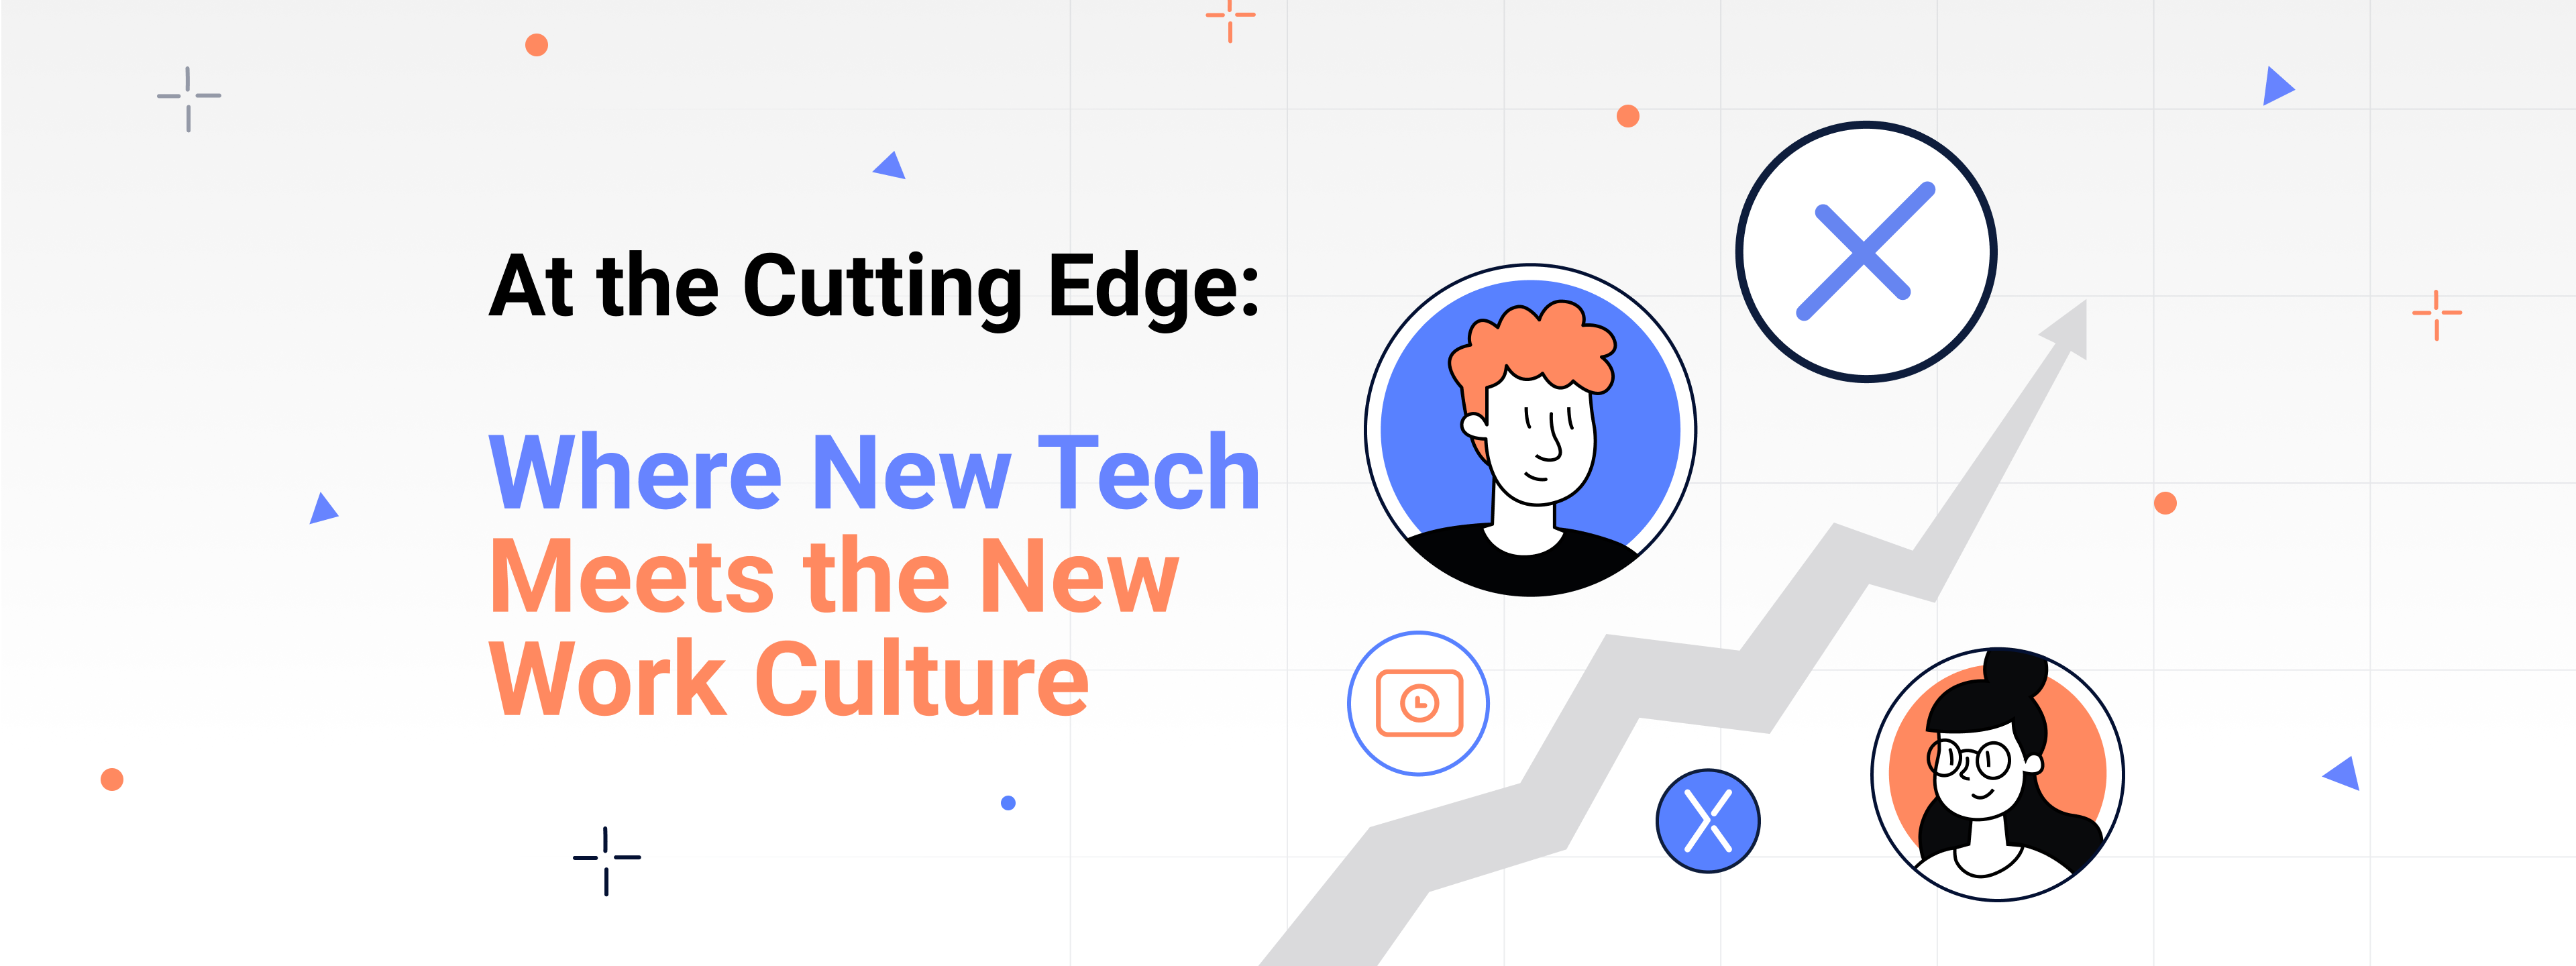 At The Cutting Edge: Where New Tech Meets The New Work Culture